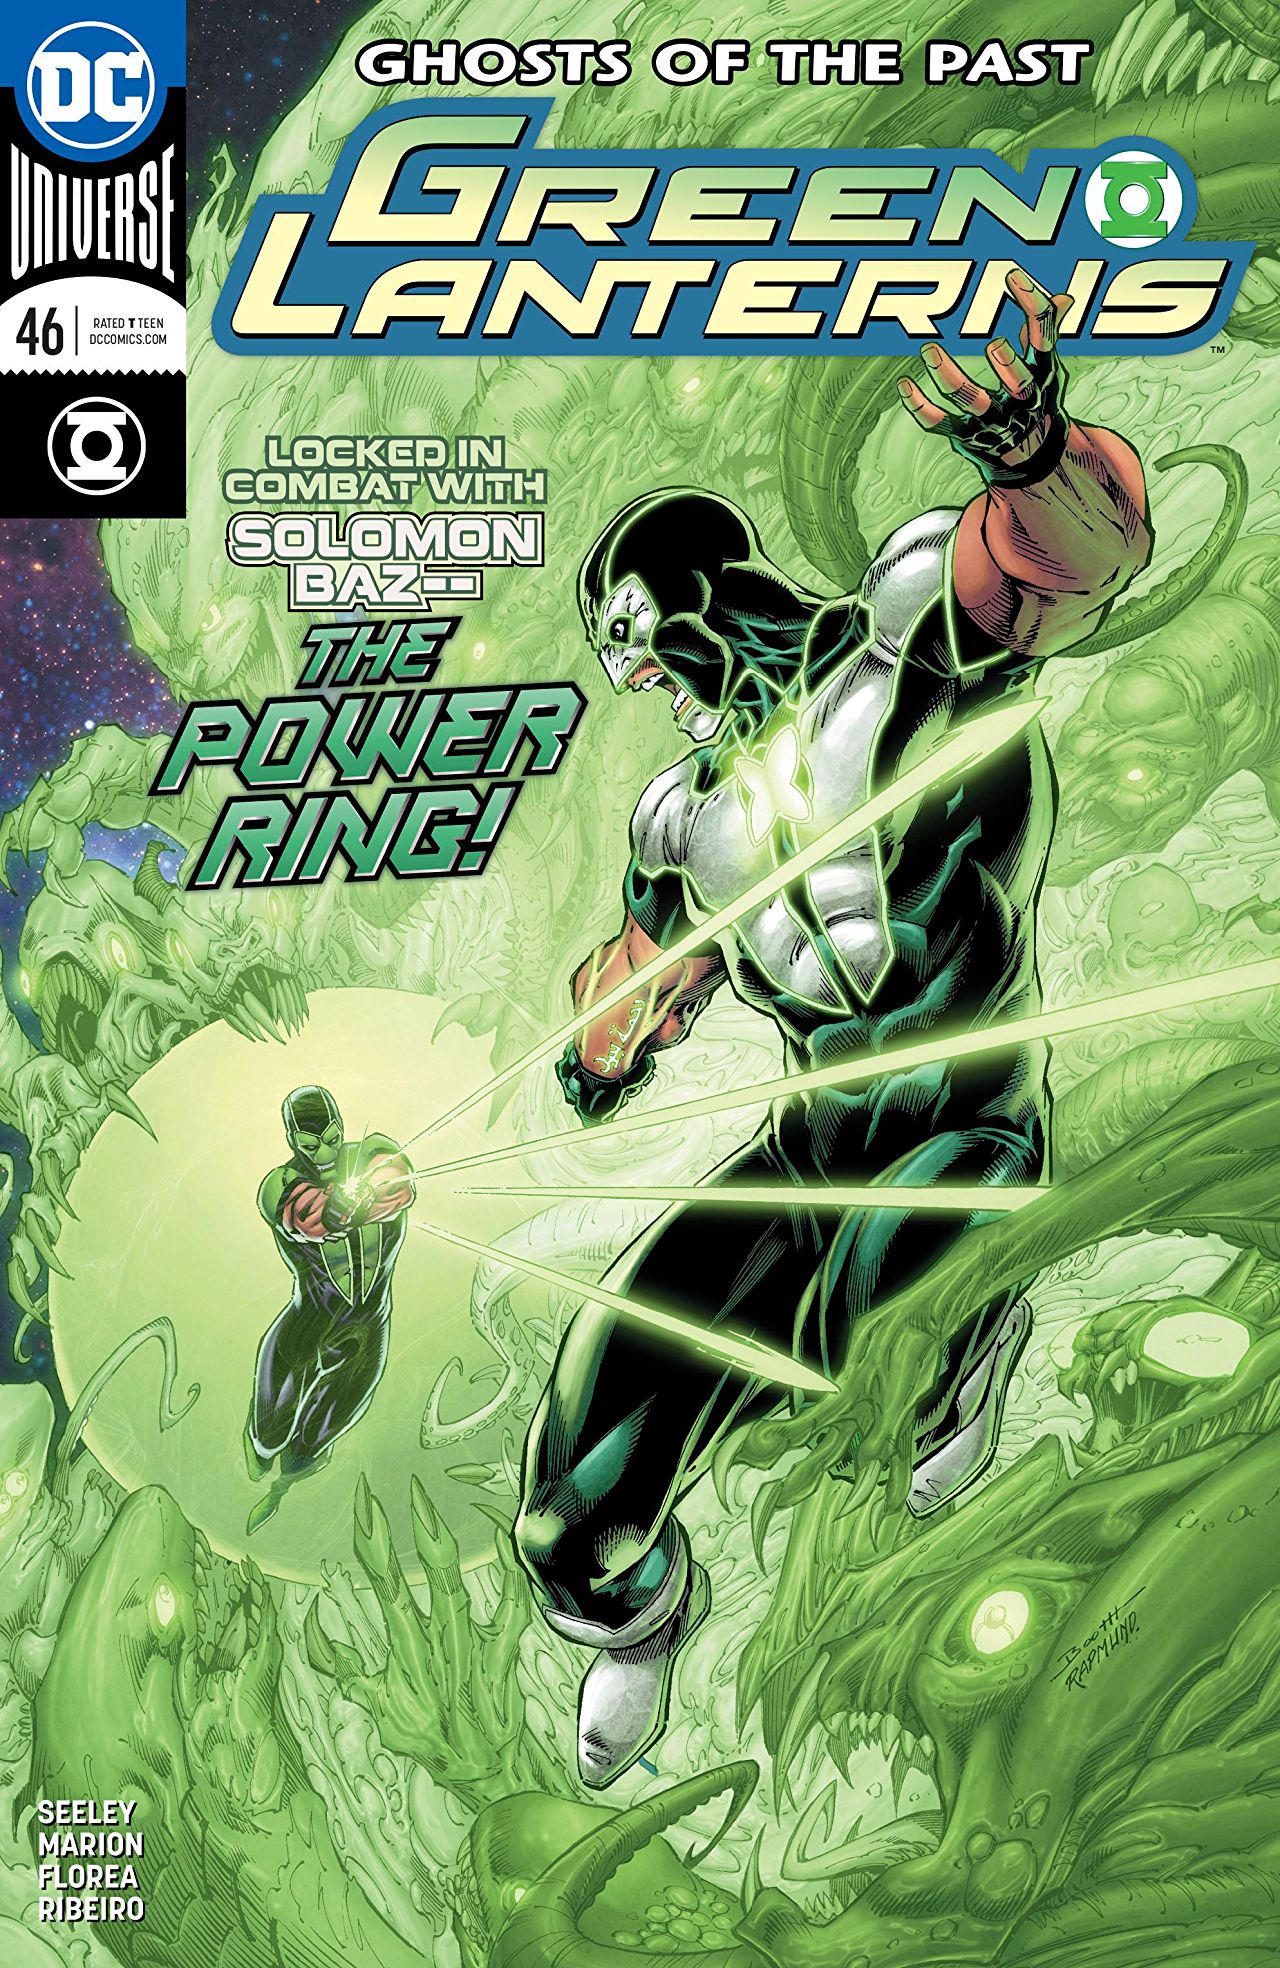 Green Lanterns #46 review: Jessica Cruz's past finally revealed in another strong issue